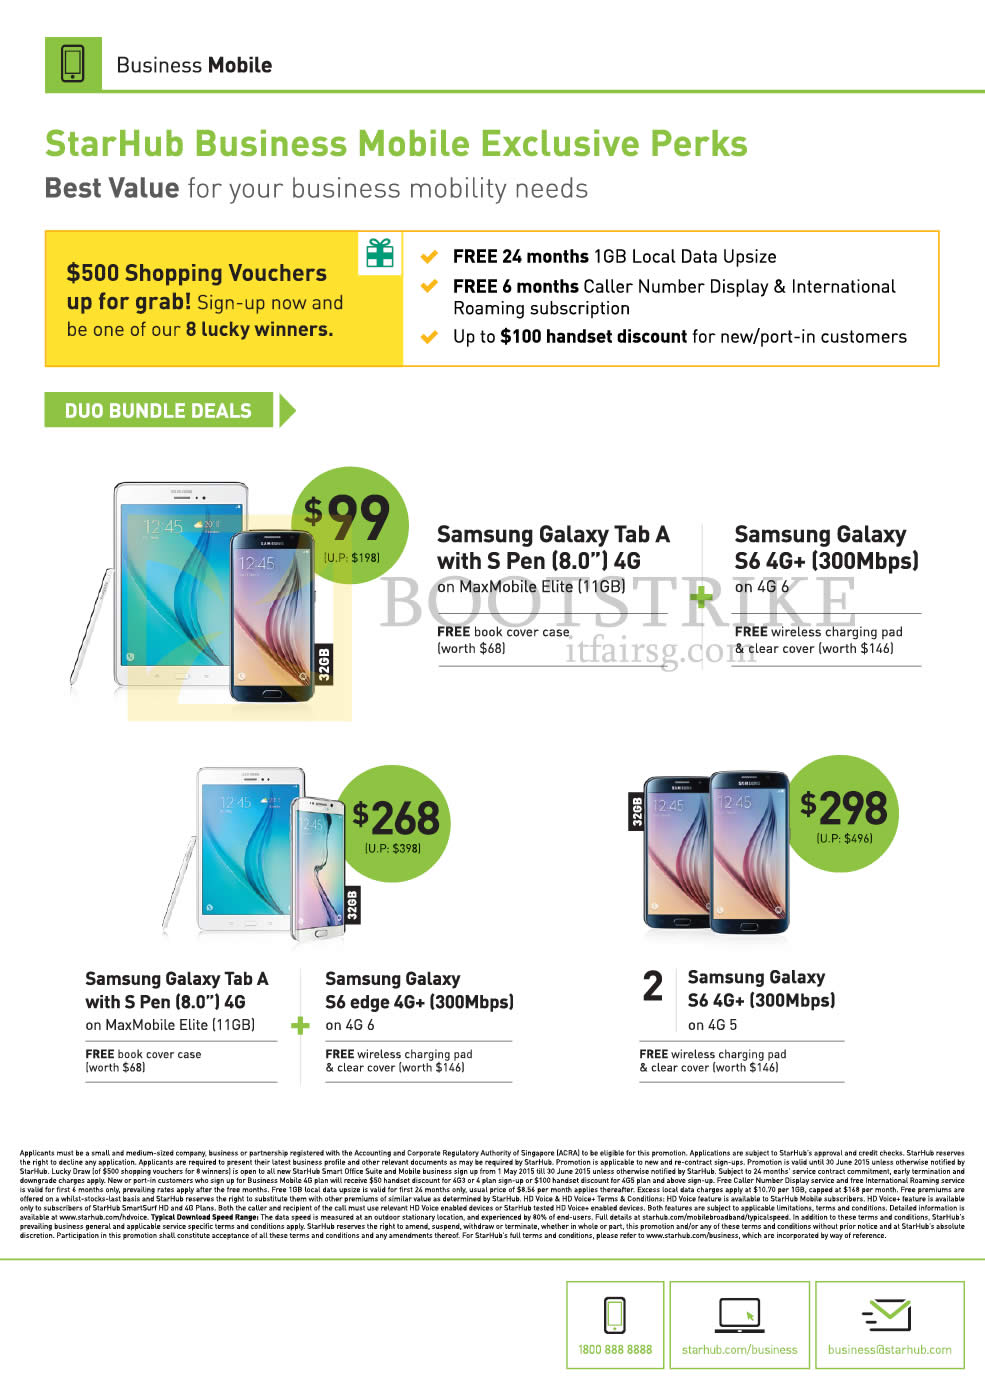 PC SHOW 2015 price list image brochure of Starhub Business Mobile Exclusive Perks, Samsung Galaxy Tab A, S6, S6 Edge